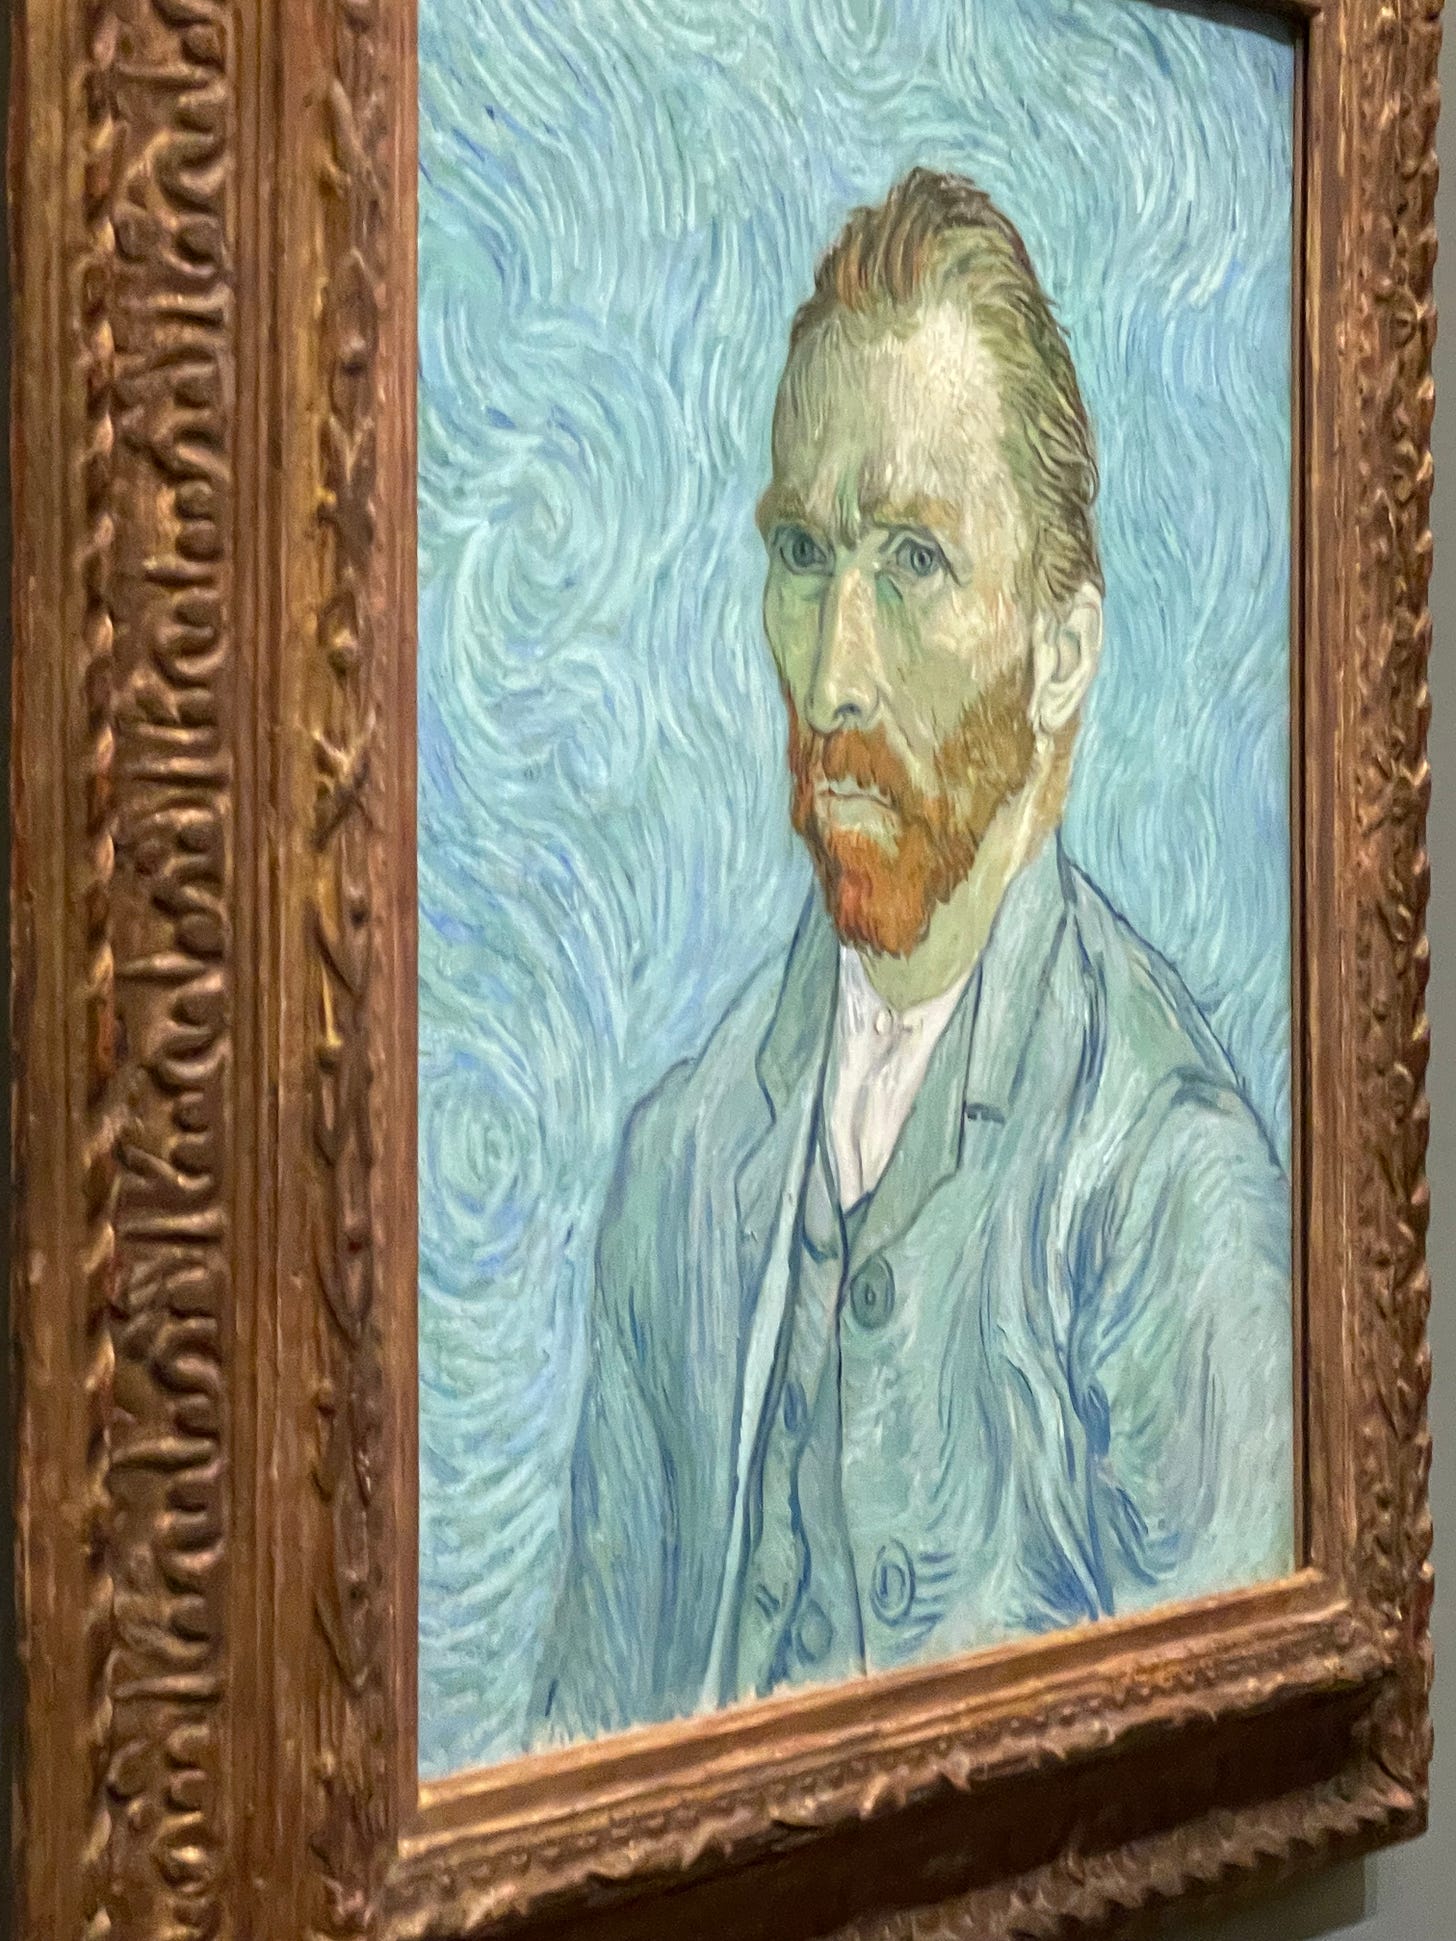 A very sharp side angle of "Portrait of the artist" by Vincent Van Gogh. The background is all blue and yellow and greens swirling into nothing. The foreground is Vincent looking stern, but thinking that he looks 'better than before'. His ginger hair and beard stand in stark contrast to the rest of the painting.